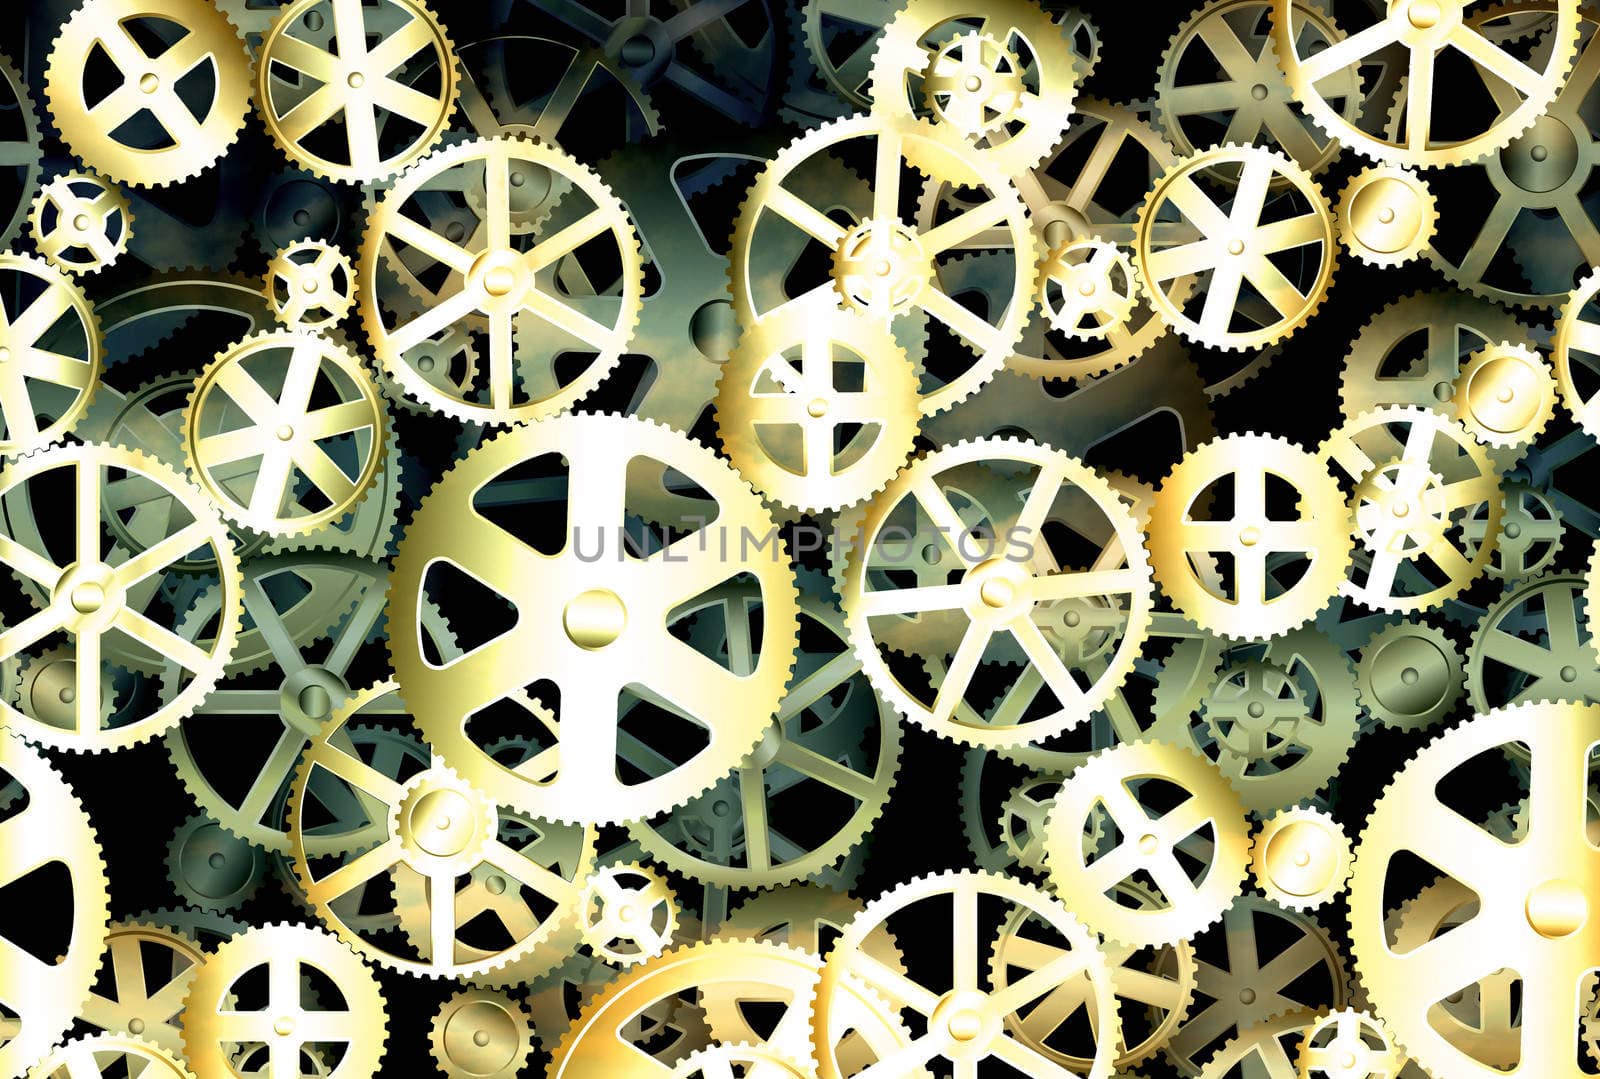 Dirty old gear wheels industrial background illustration
